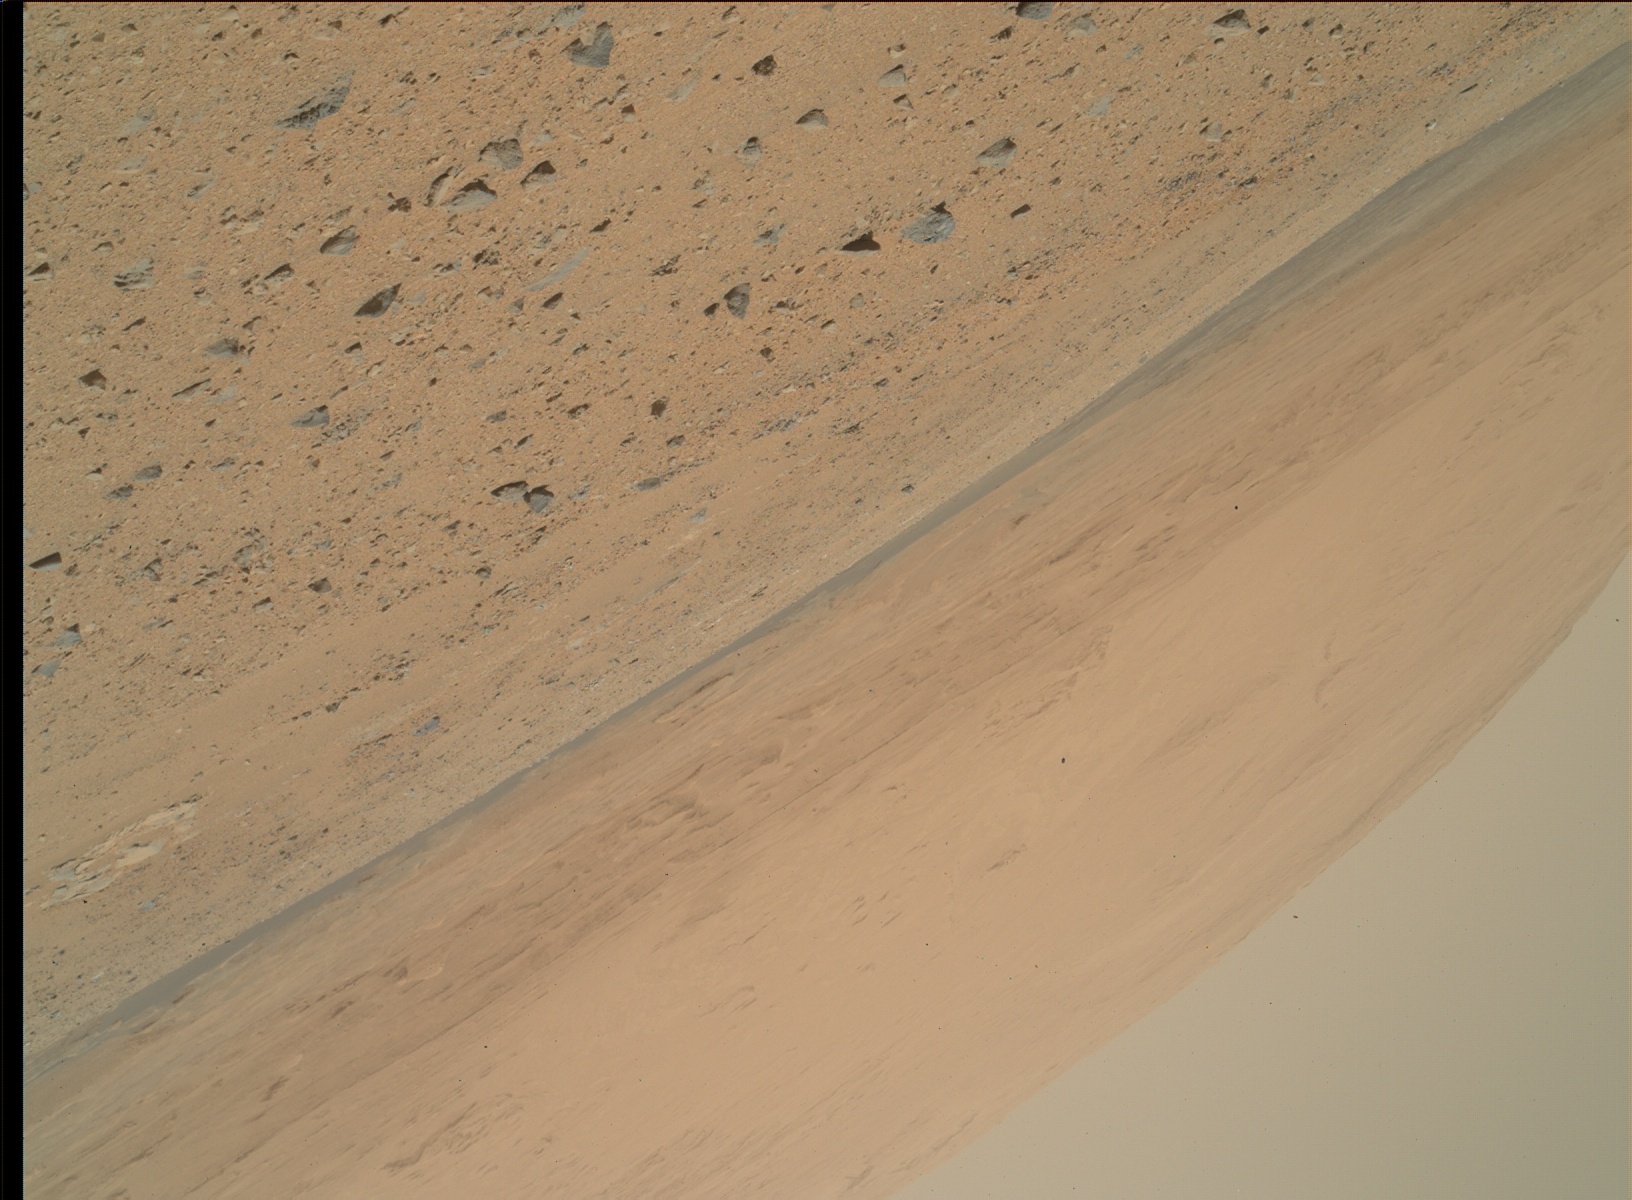 Nasa's Mars rover Curiosity acquired this image using its Mars Hand Lens Imager (MAHLI) on Sol 340